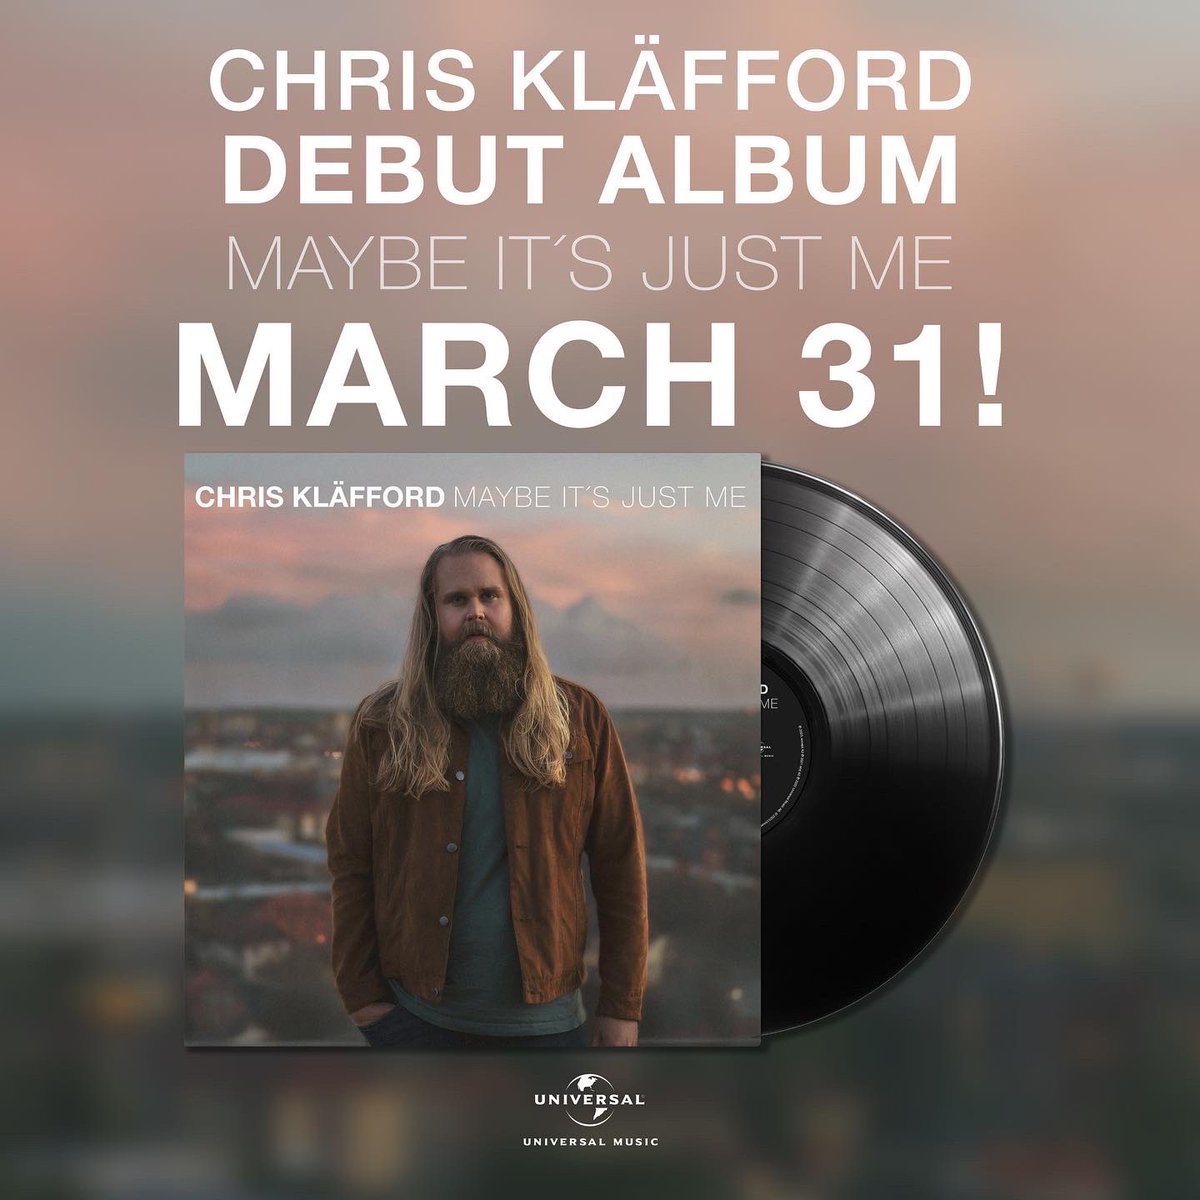 The day is finally here! I can finally announce the release date for my debut album! (Doesn’t even feel real yet!) Friday, March 31, the album ‘Maybe it’s just me’ drops and I am so excited for you to finally hear it! 🤗🥰😘❤️